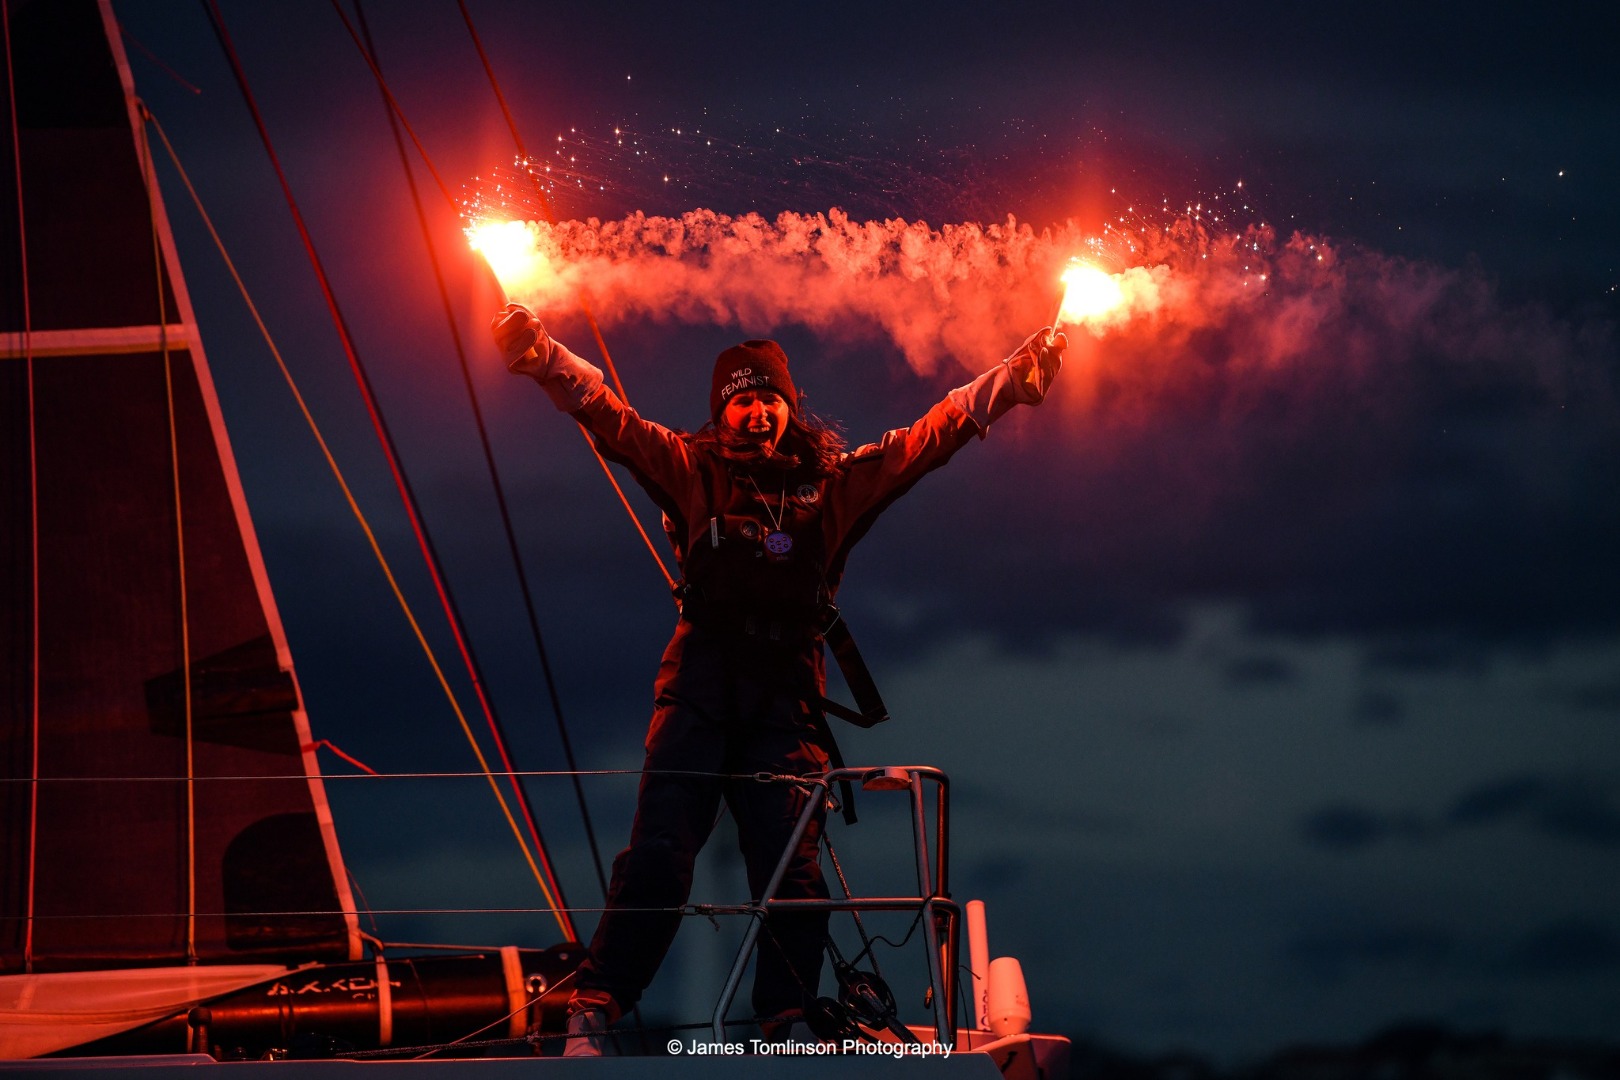 Image of Cole Brauer finishing the Global Solo Challenge, the first American woman to complete a solo race around the world non-stop, sailing First Light (ex Dragon), her Owen Clarke Design Class 40.